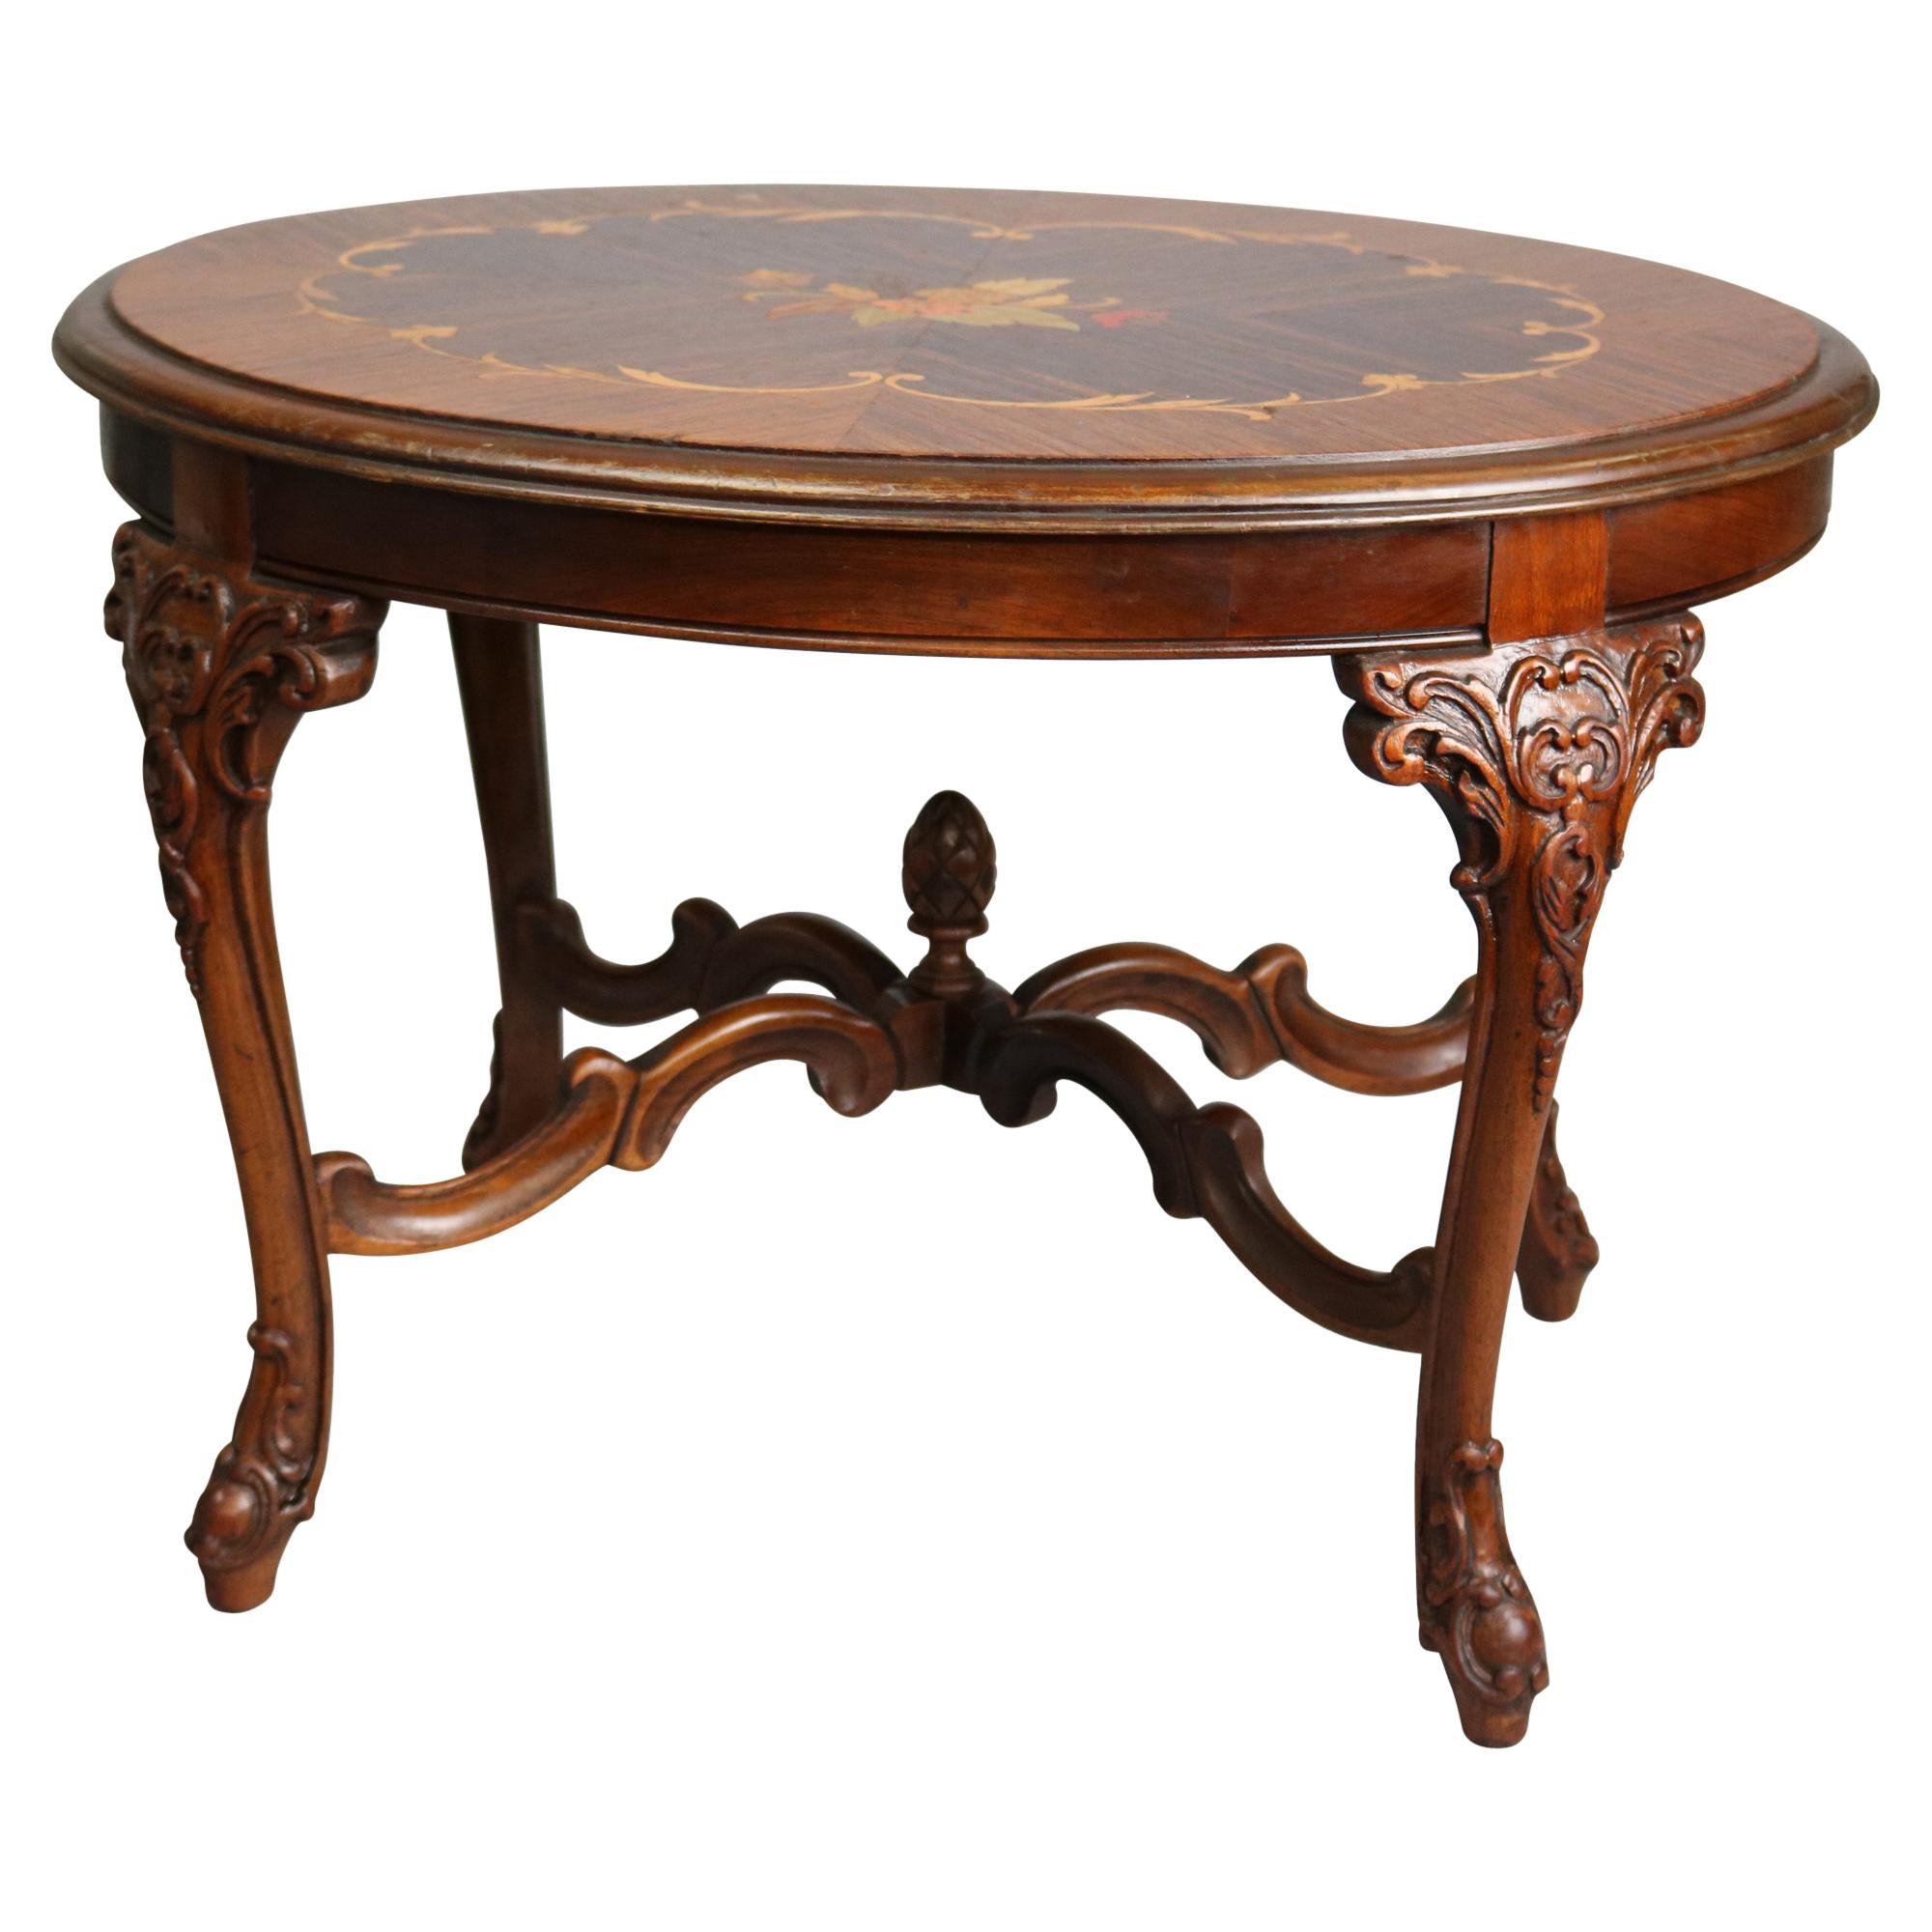 Antique French Style Mahogany and Kingwood Marquetry Inlaid Low Side Table